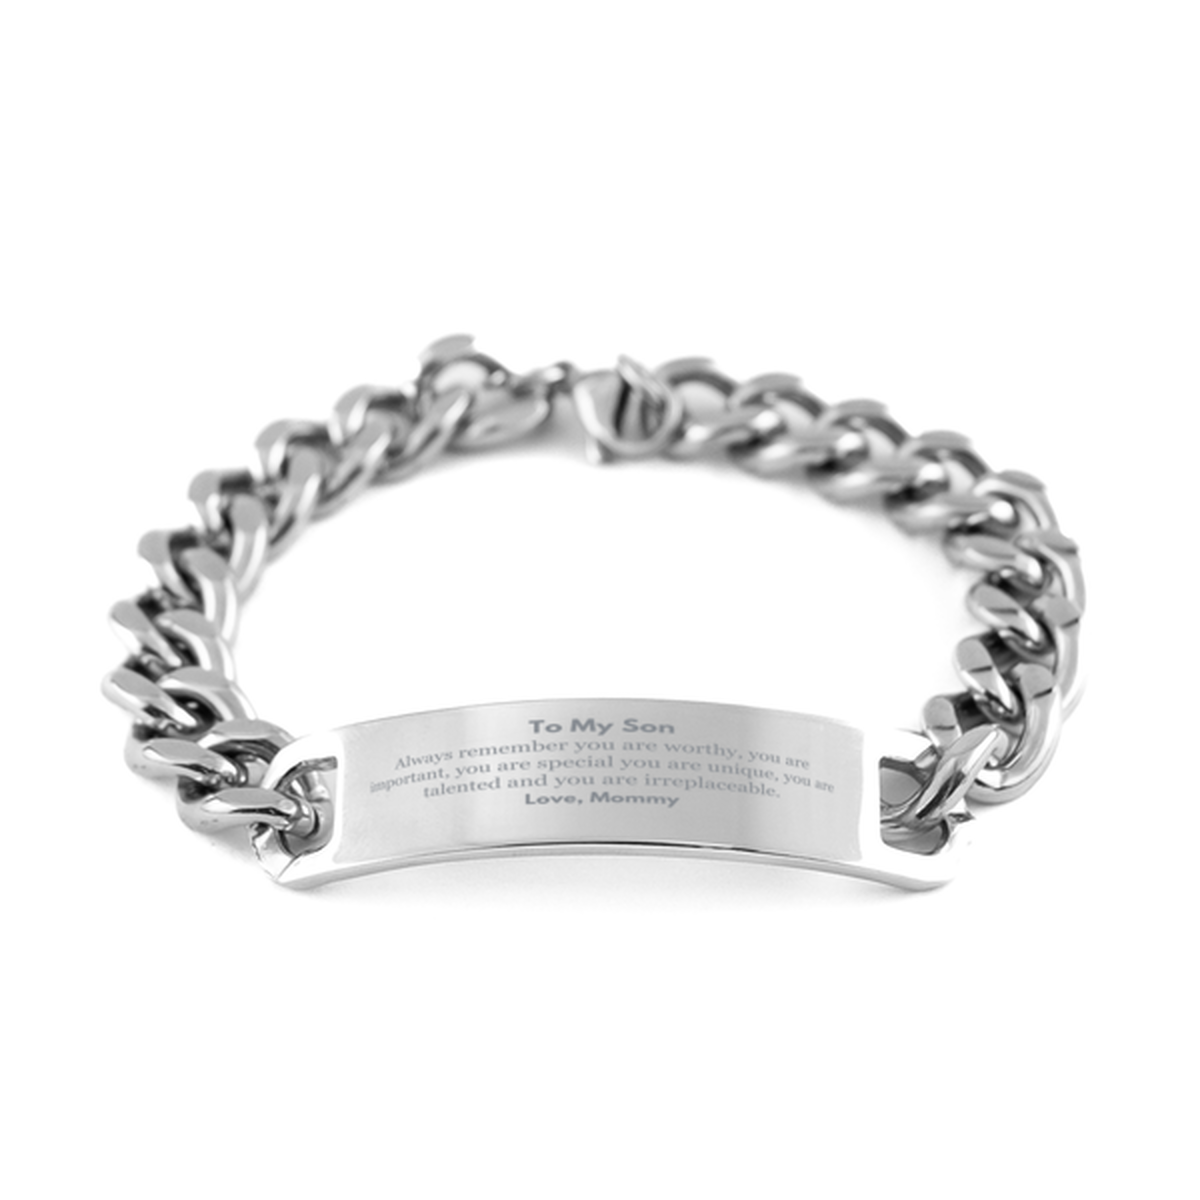 Son Birthday Gifts from Mommy, Inspirational Cuban Chain Stainless Steel Bracelet for Son Christmas Graduation Gifts for Son Always remember you are worthy, you are important. Love, Mommy